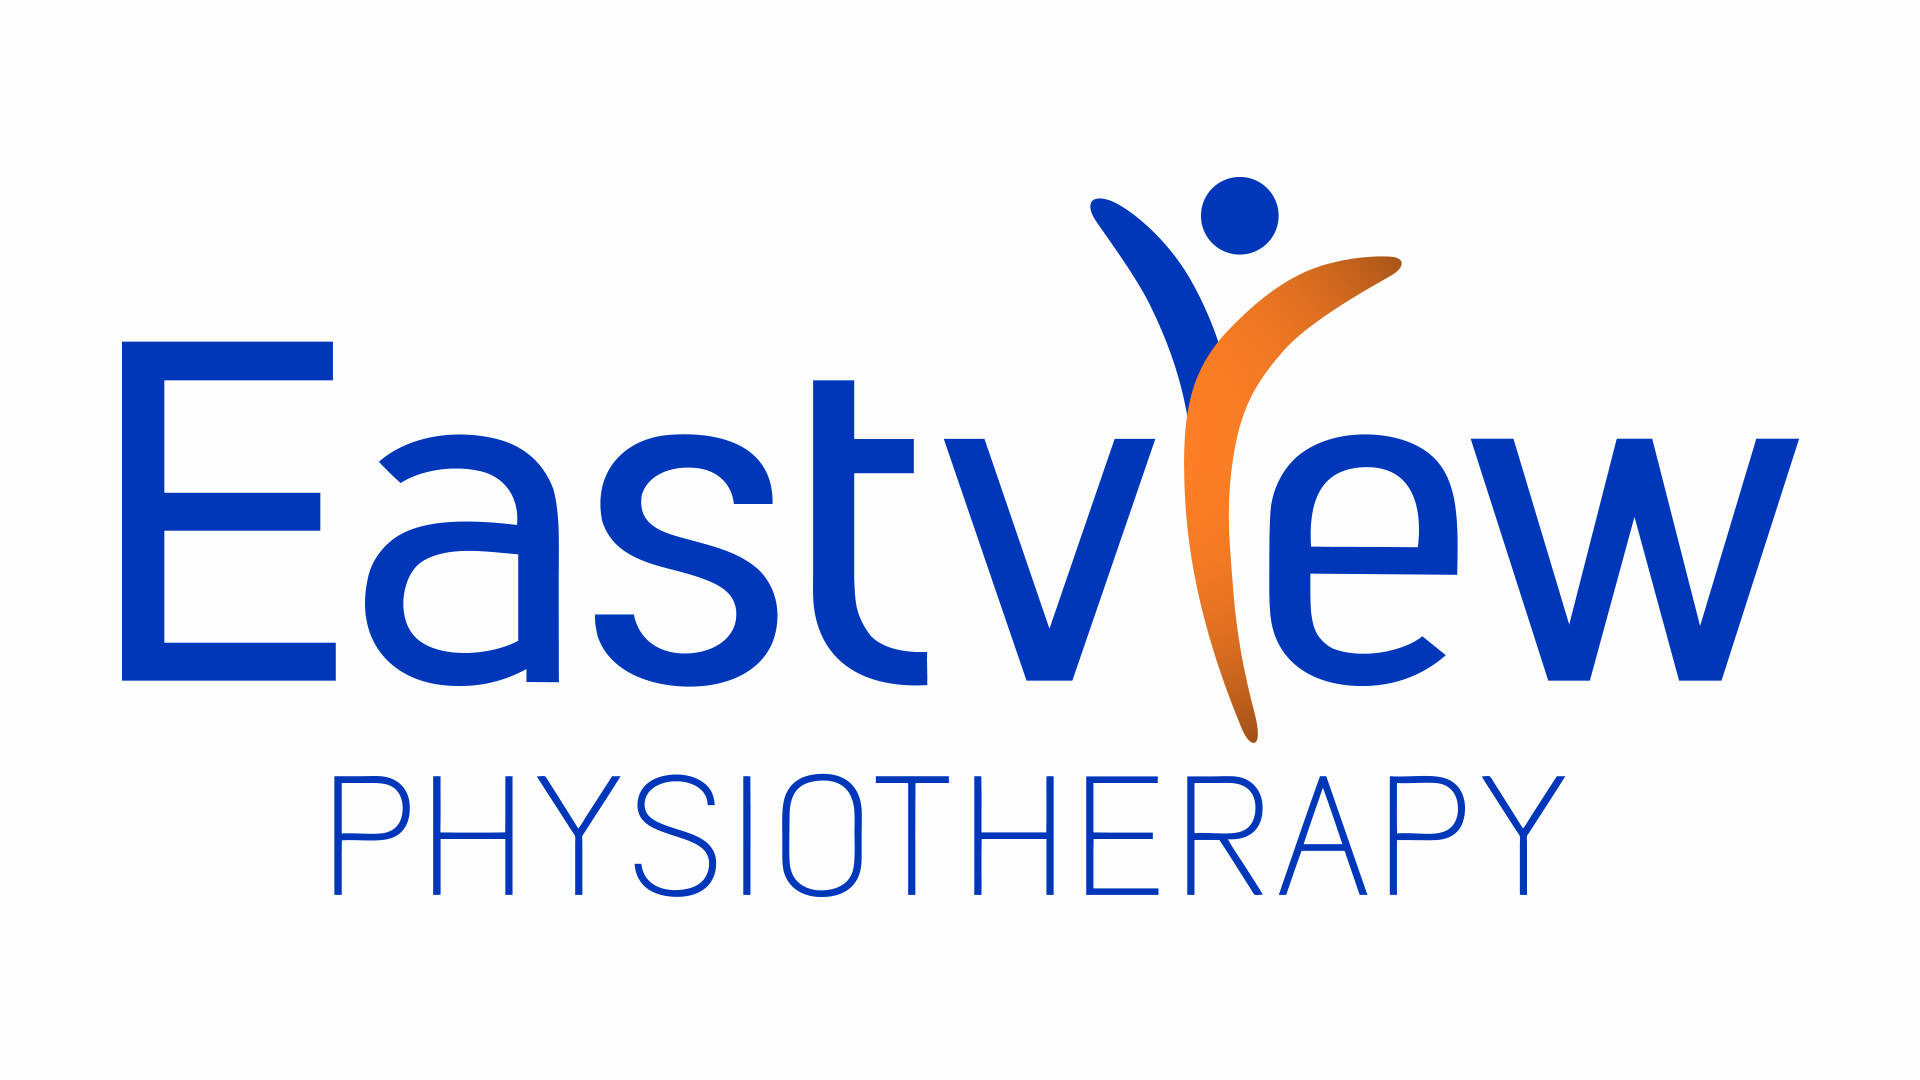 Eastview Physiotherapy